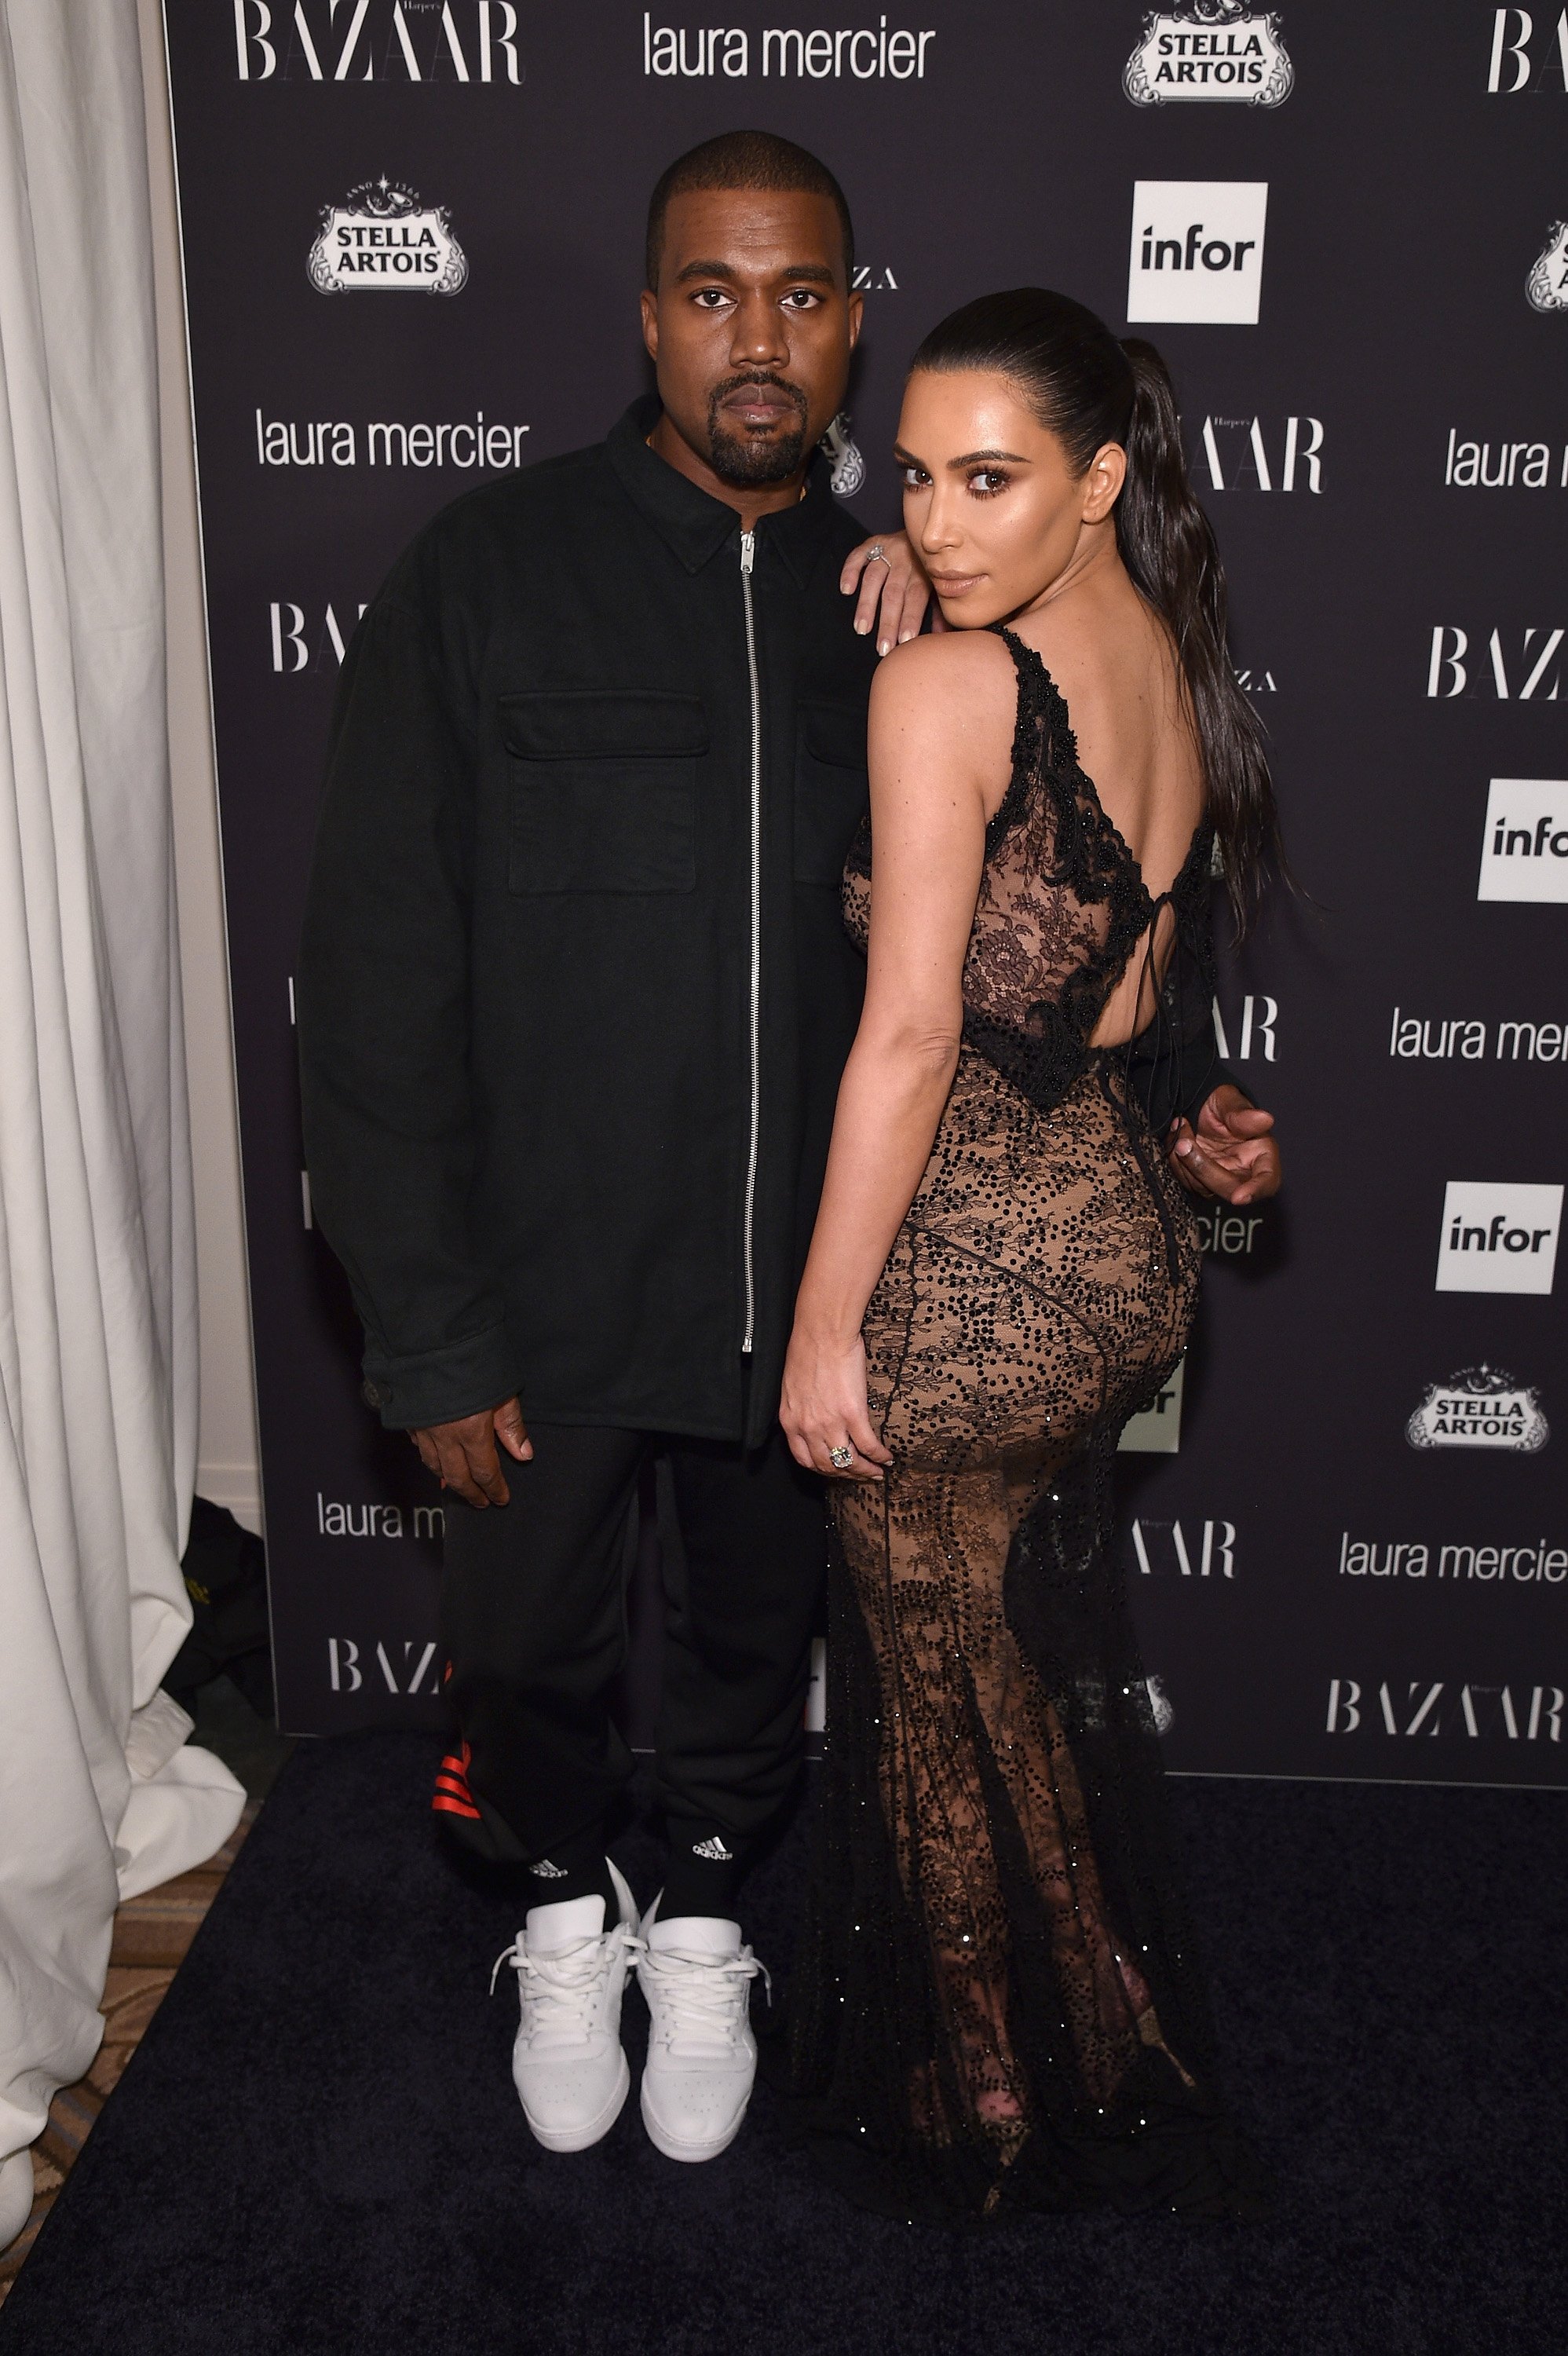 Kanye West and Kim Kardashian West attend Harper's Bazaar's celebration of "ICONS By Carine Roitfeld" on September 9, 2016, in New York City. | Source: Getty Images.